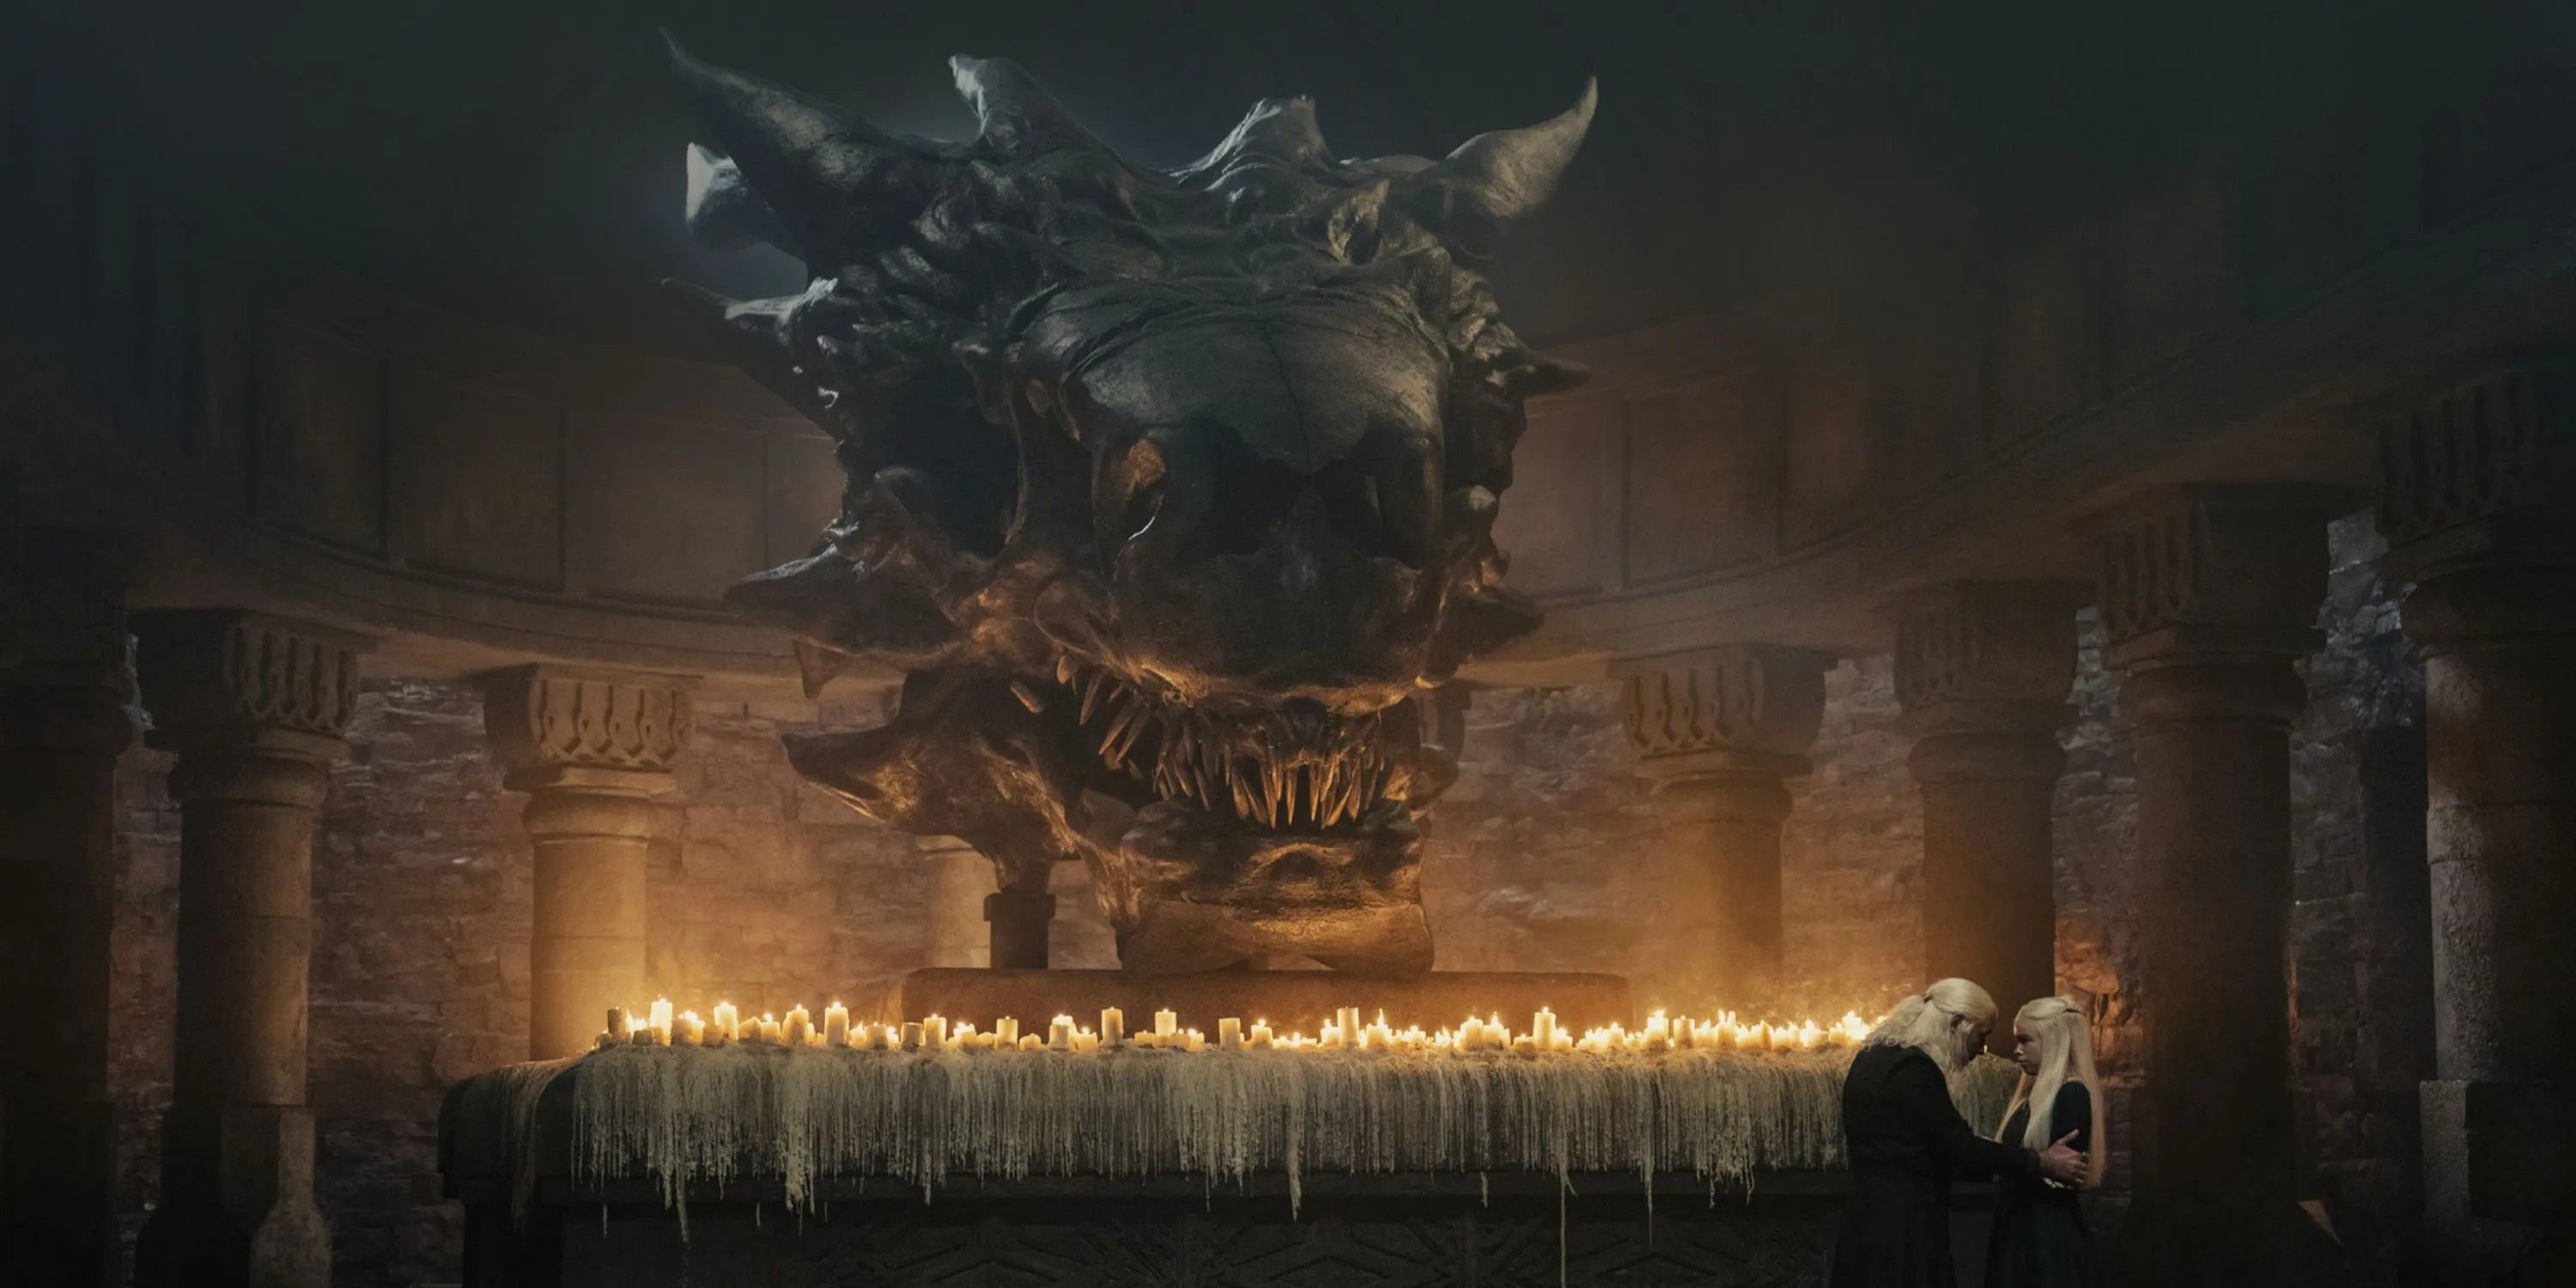 House of the Dragon: Rhaenyra and Viserys in front of Balerion